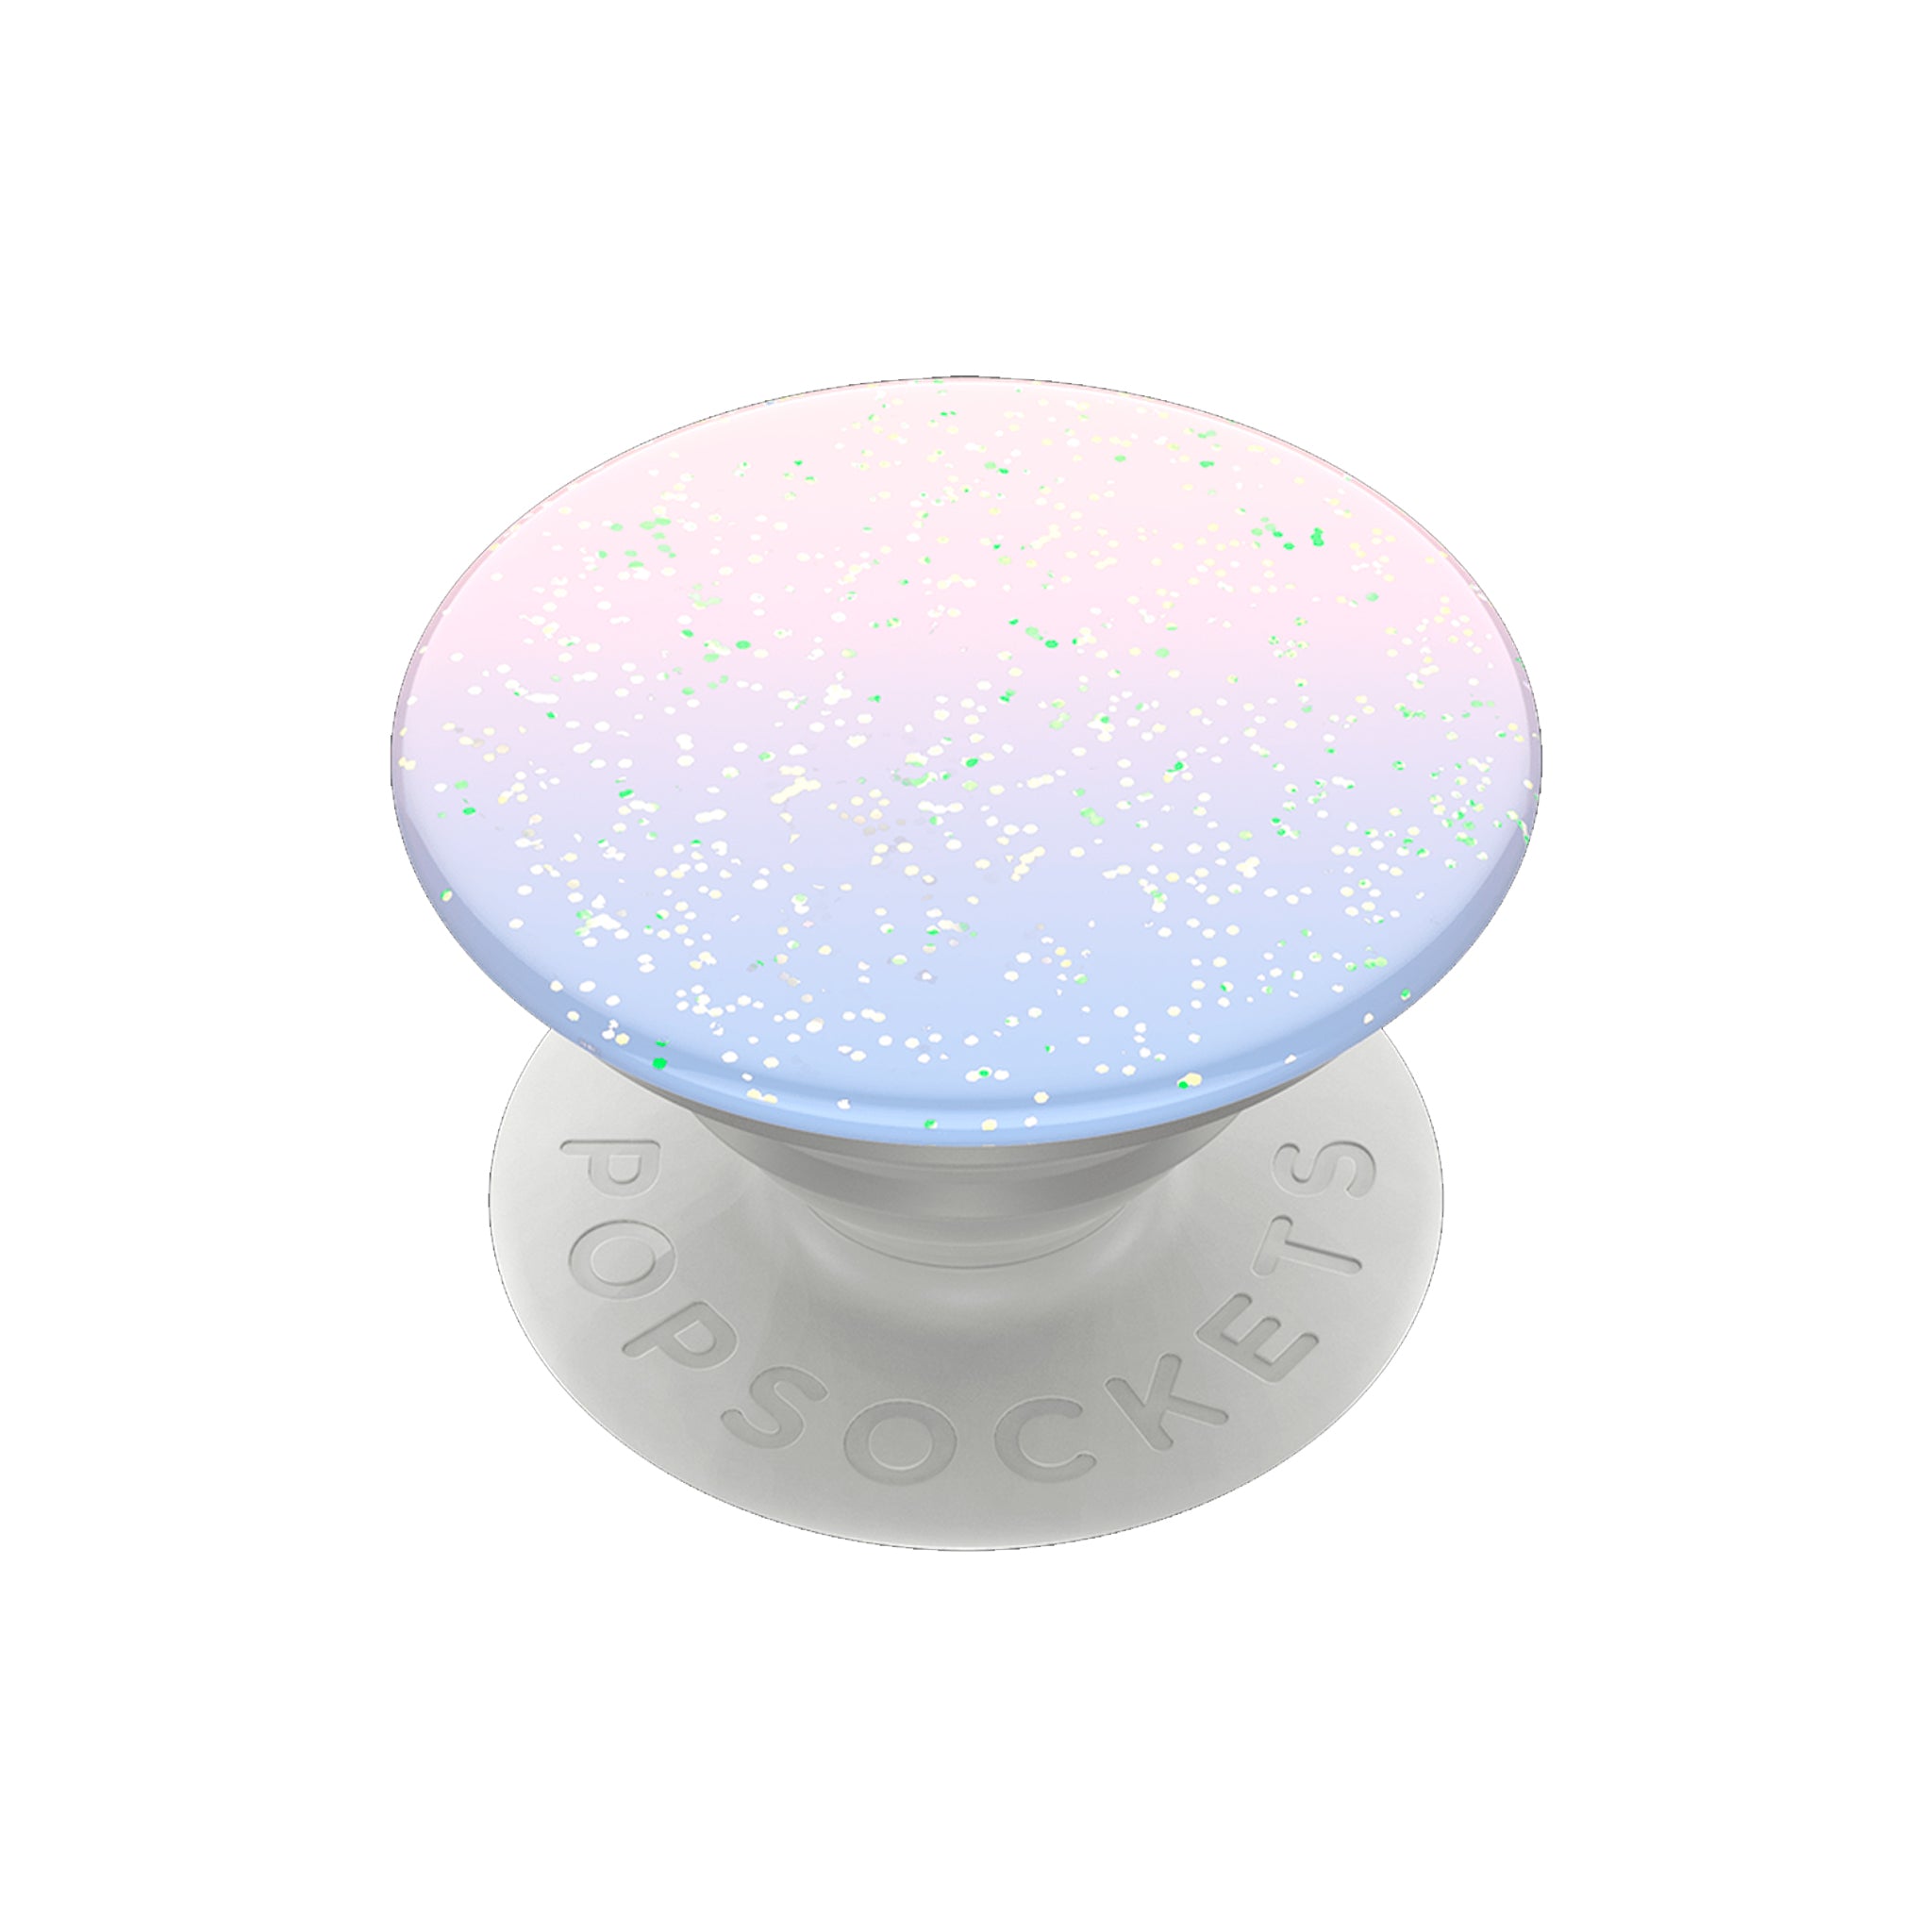 Popsockets - Popgrip Premium Swappable Device Stand And Grip - Glitter Morning Haze